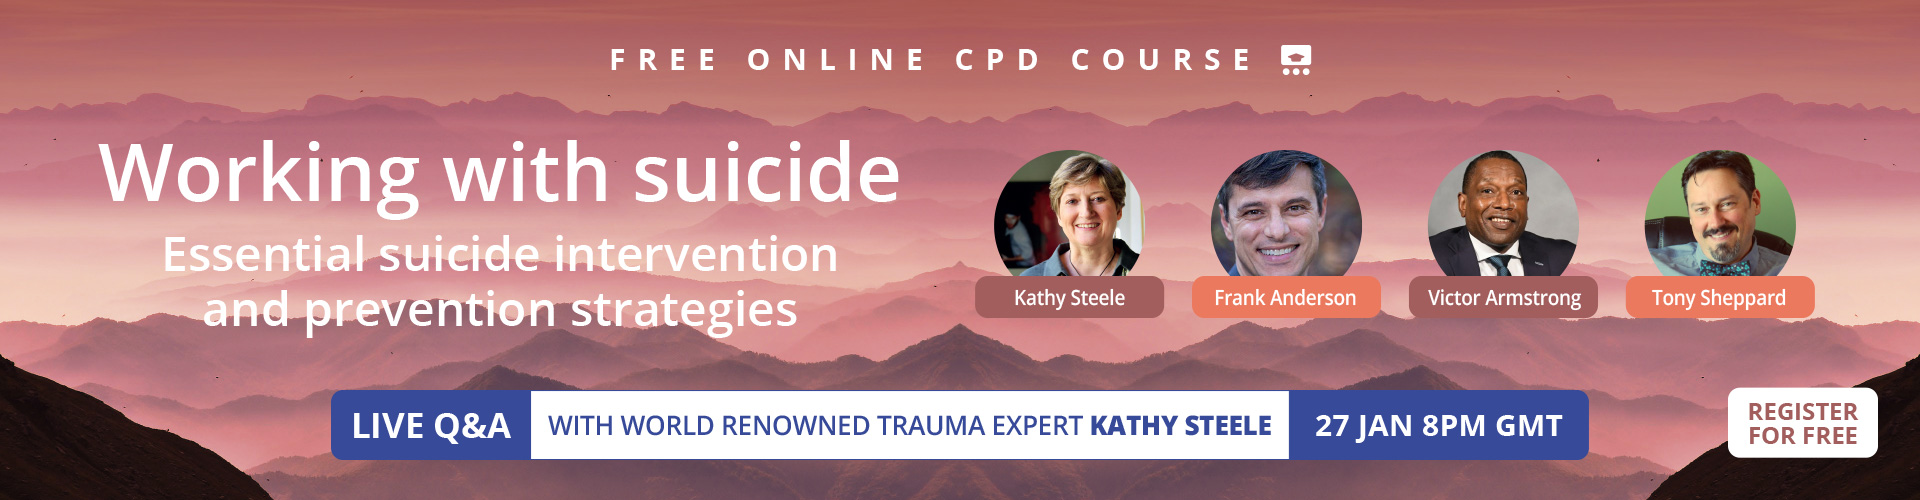 Working with suicide: essential suicide intervention and prevention strategies